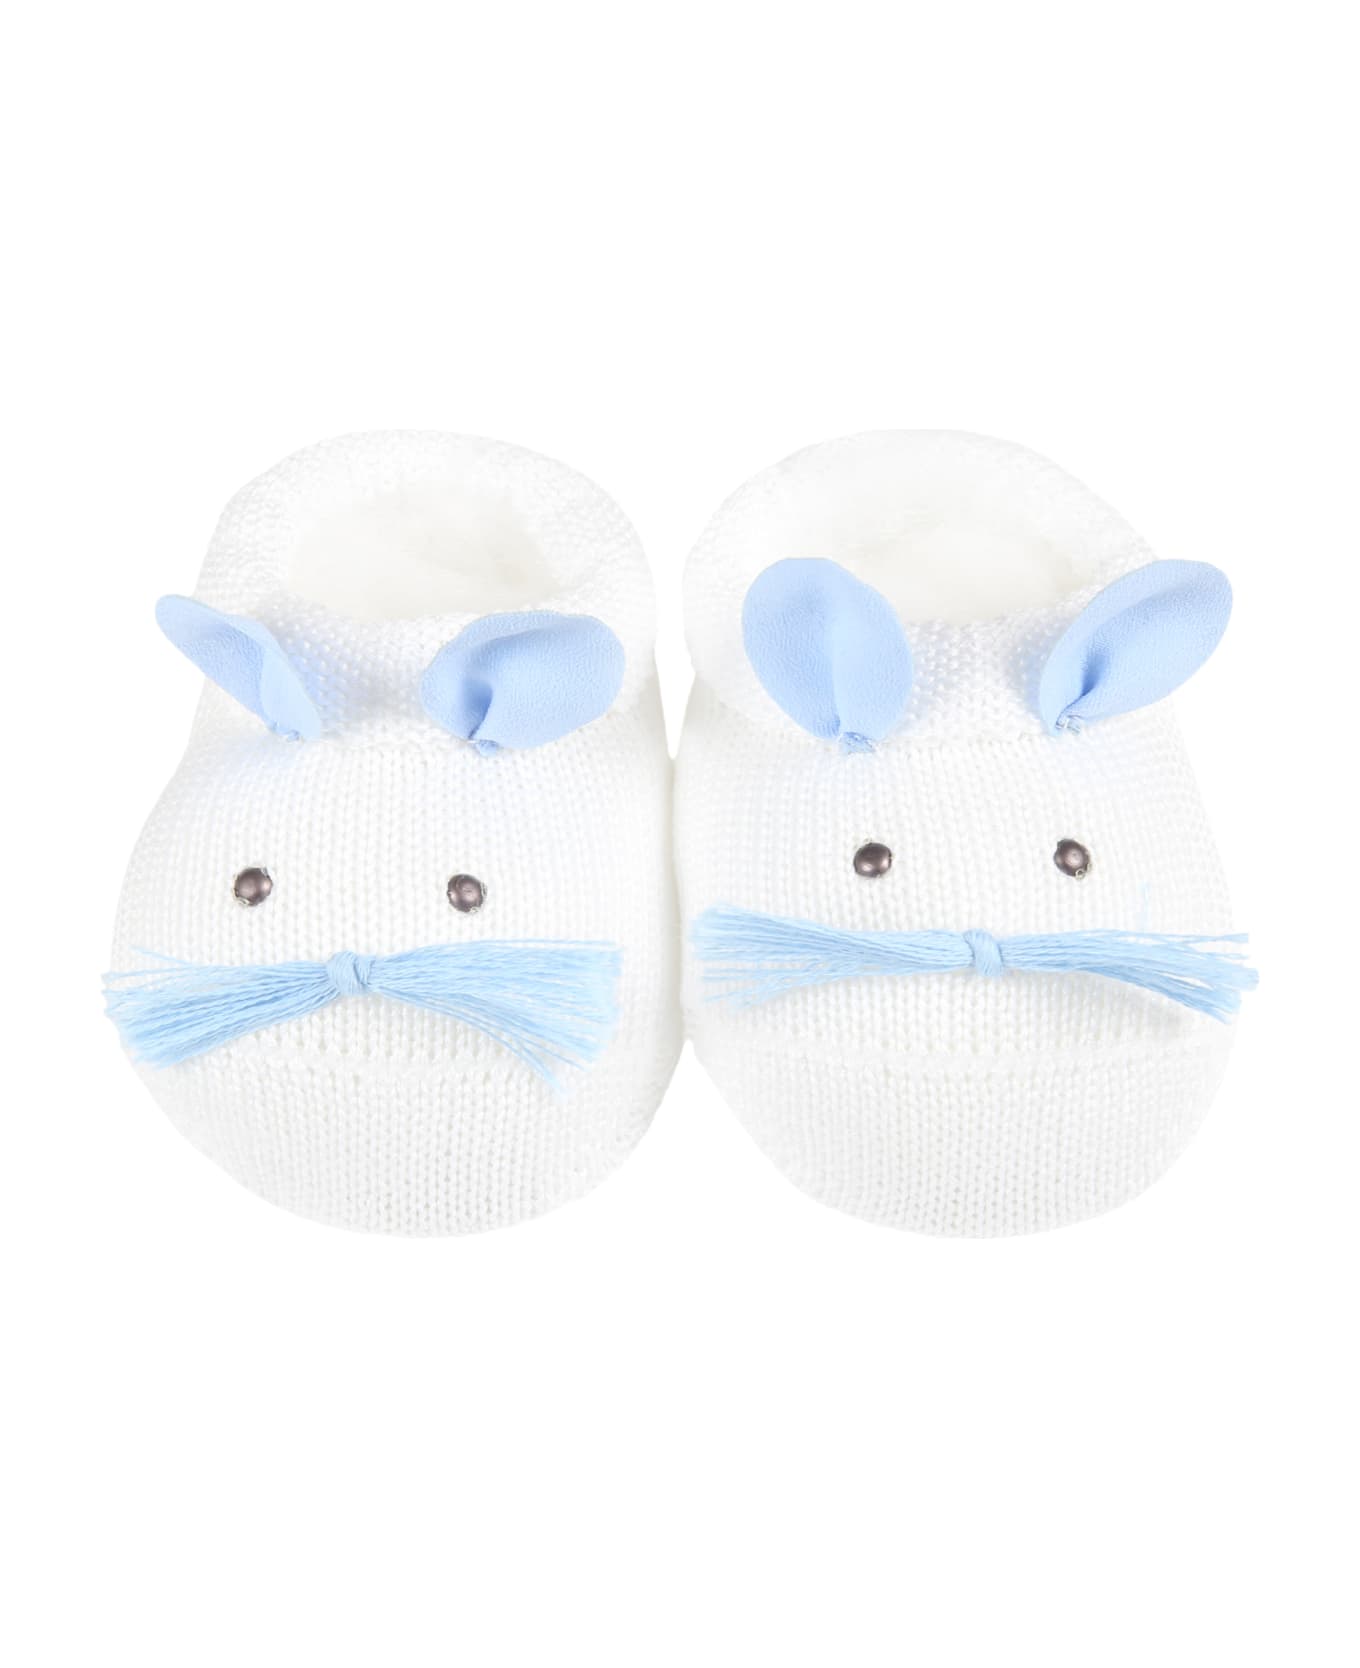 Story Loris White Baby-bootee For Baby Boy - White アクセサリー＆ギフト